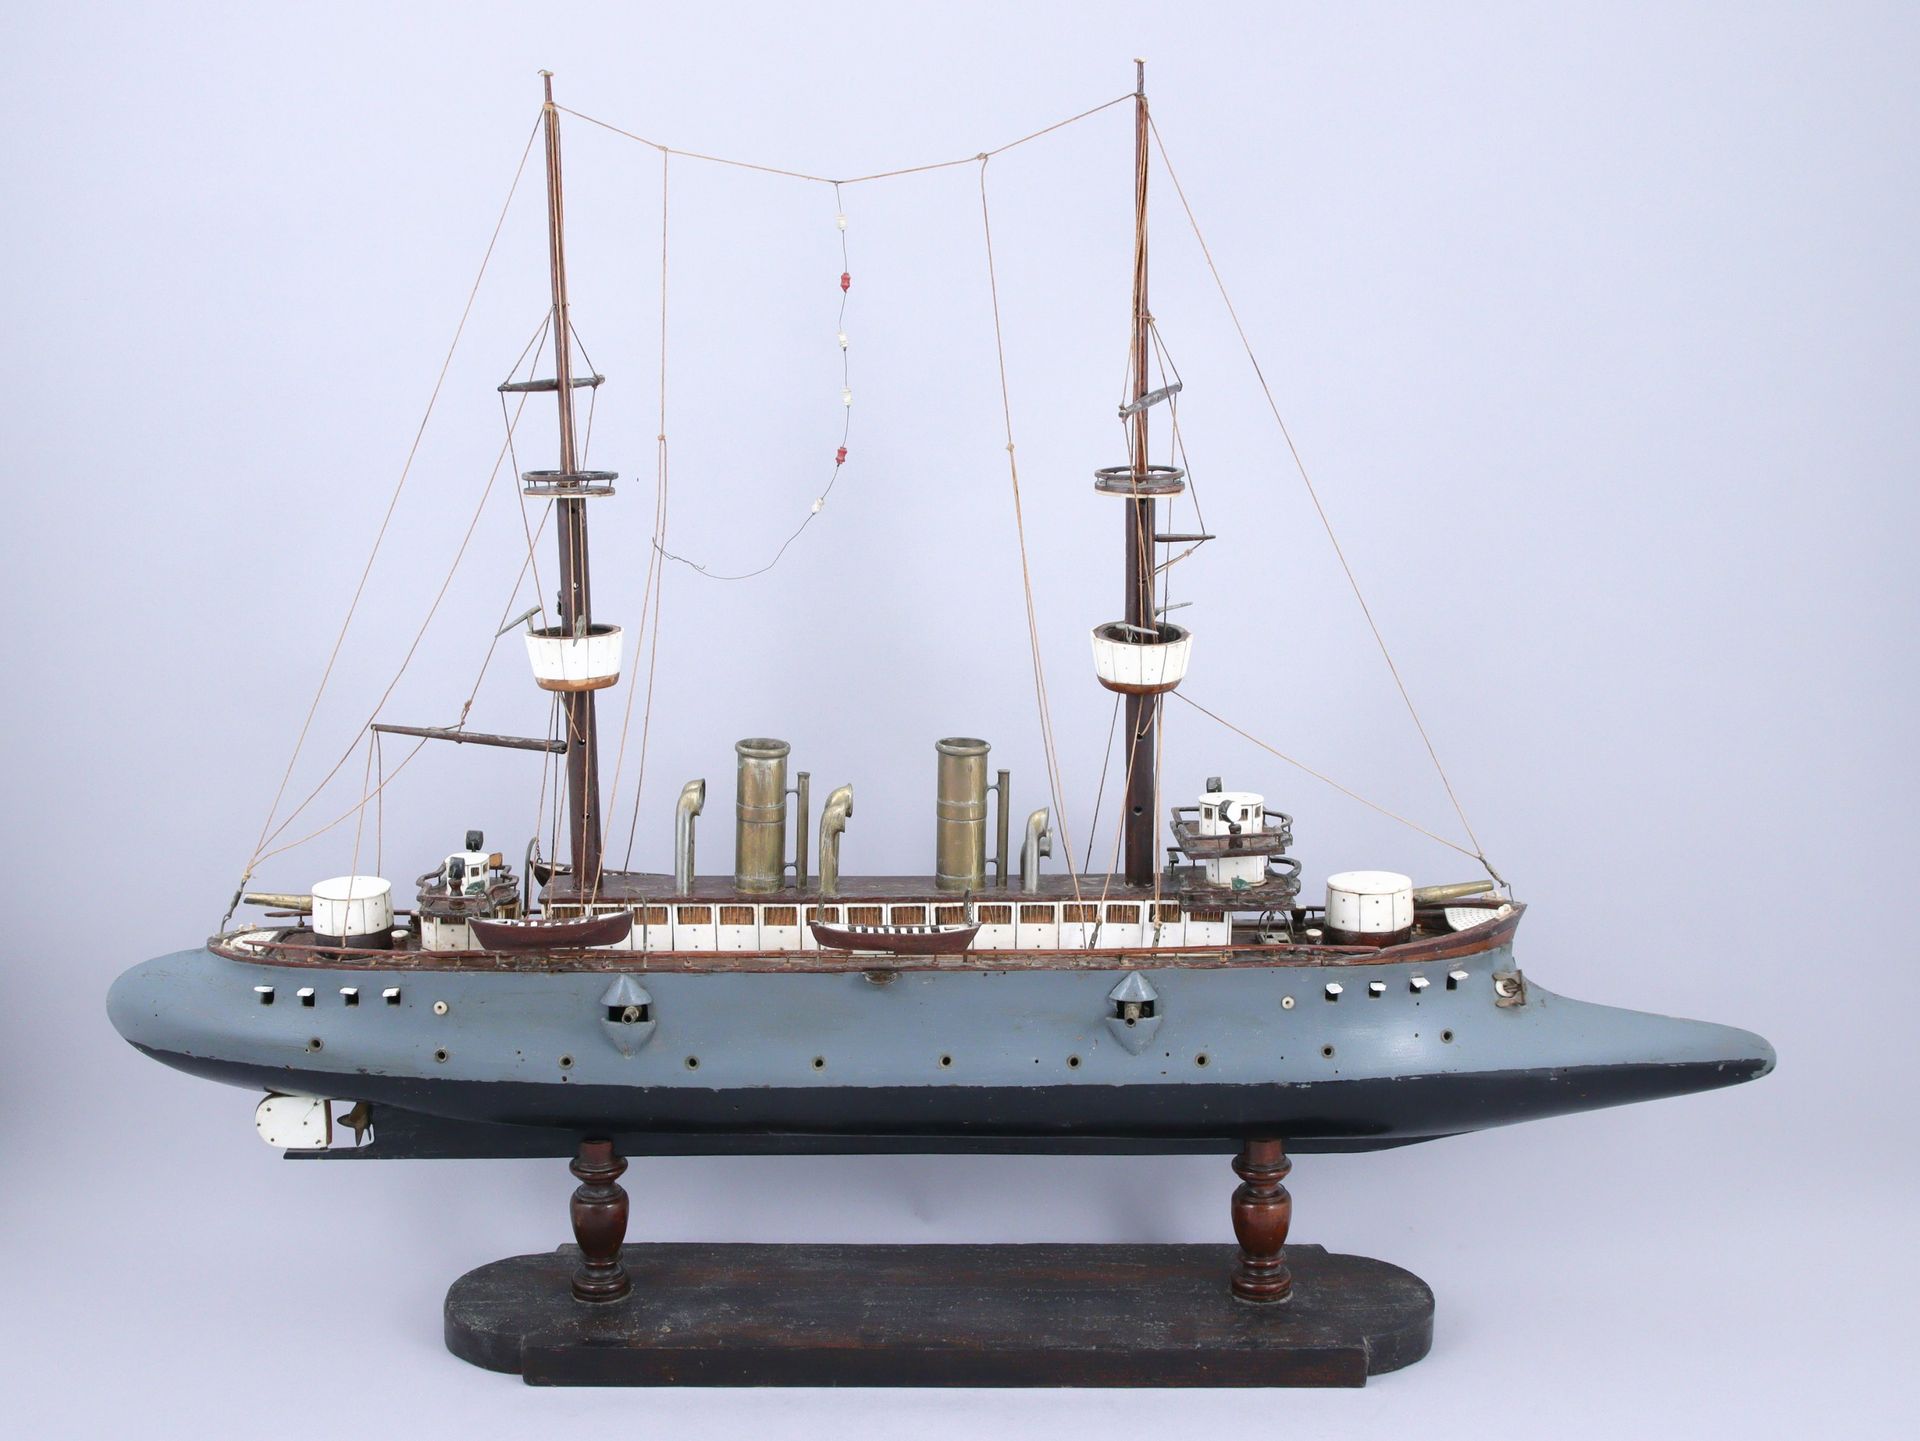 Null Model of a battleship made of wood, metal and bone. With a long spur and tw&hellip;